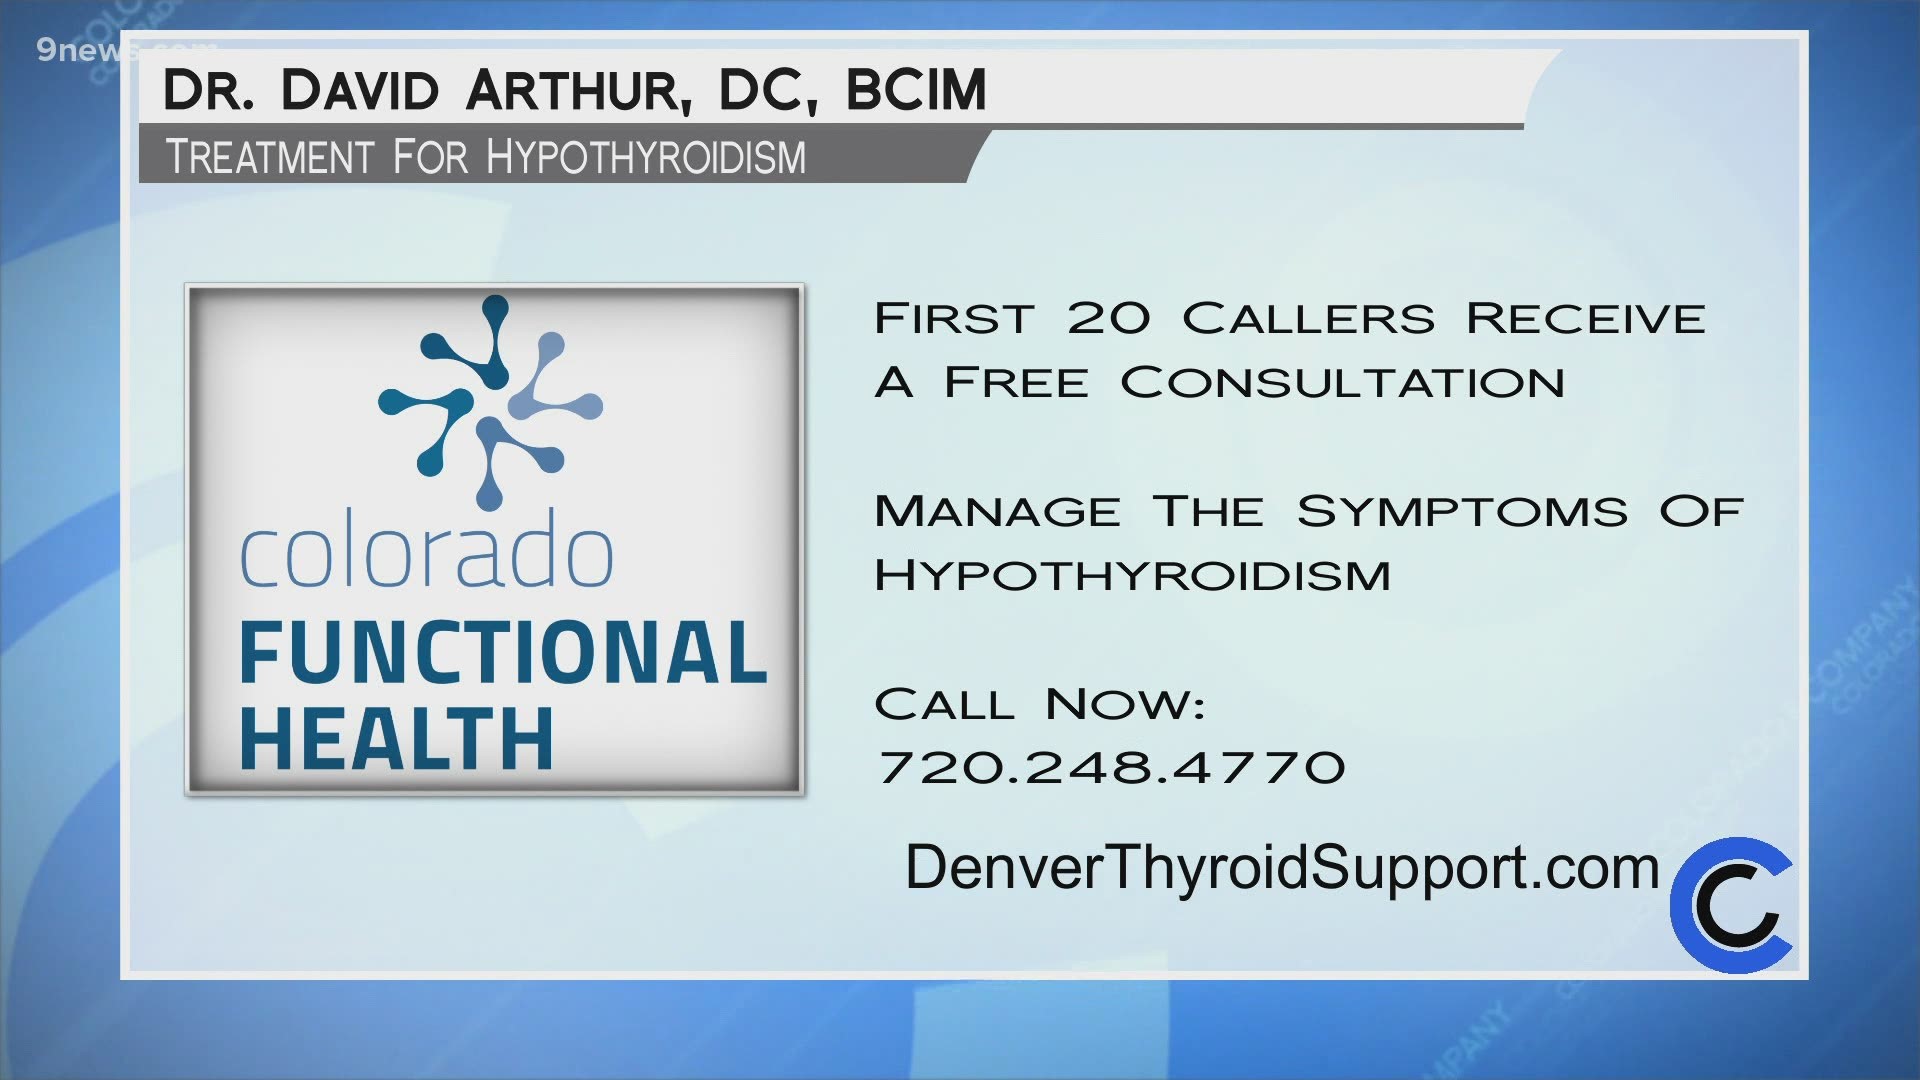 Visit DenverThyroidSupport.com or call Dr. Arthur at 720.248.4770 to find out how his treatments can help you with your thyroid issues.